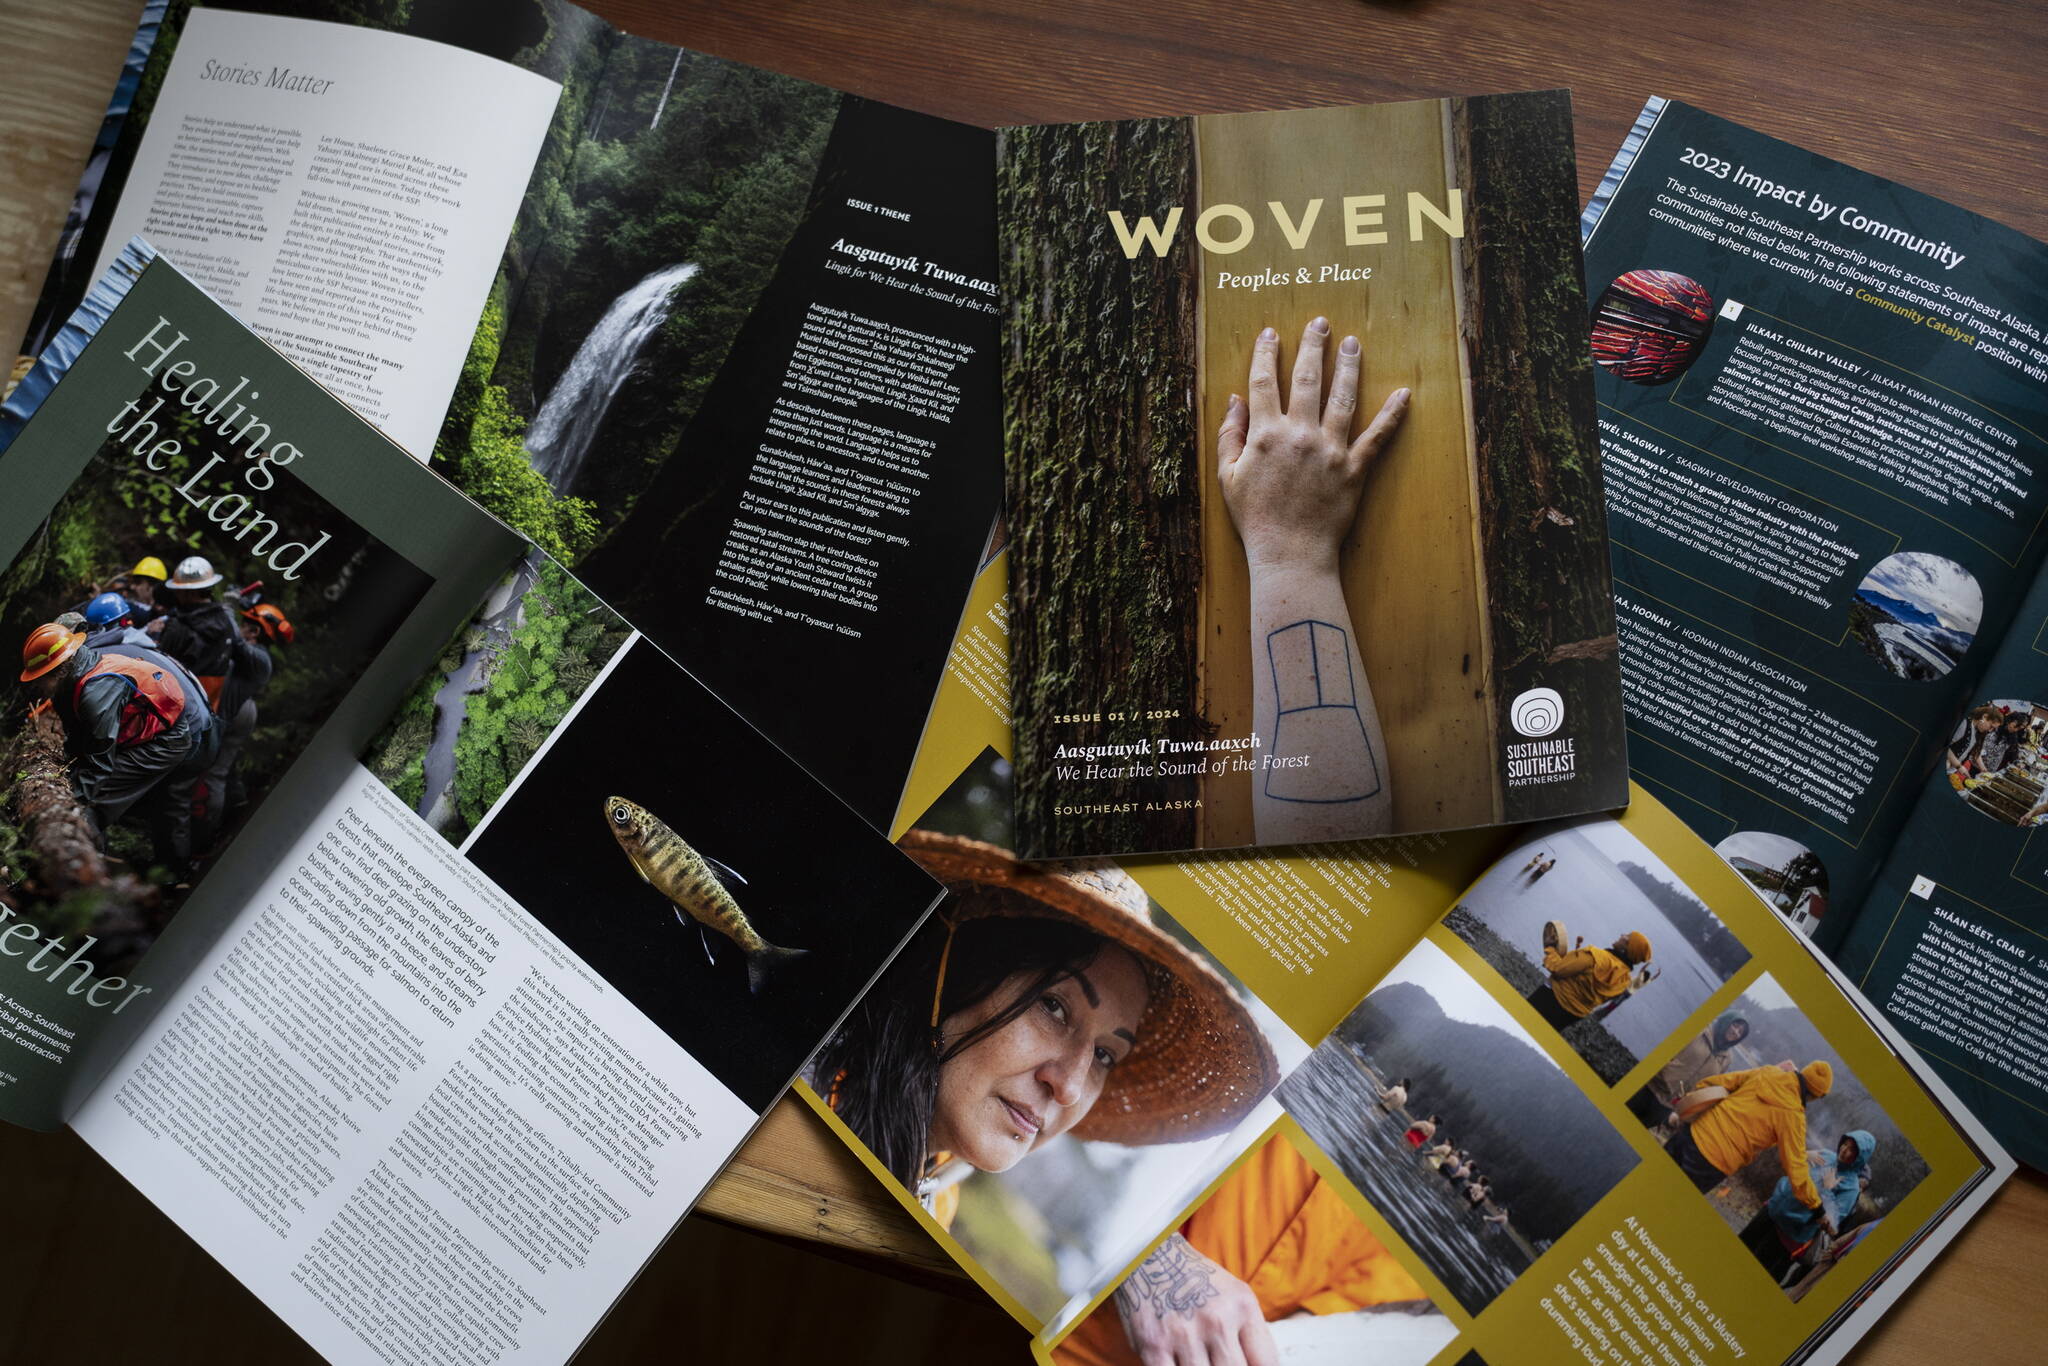 “Woven” is a new digital and print publication by the Sustainable Southeast Partnership. (Photo courtesy of Sustainable Southeast Partnership)